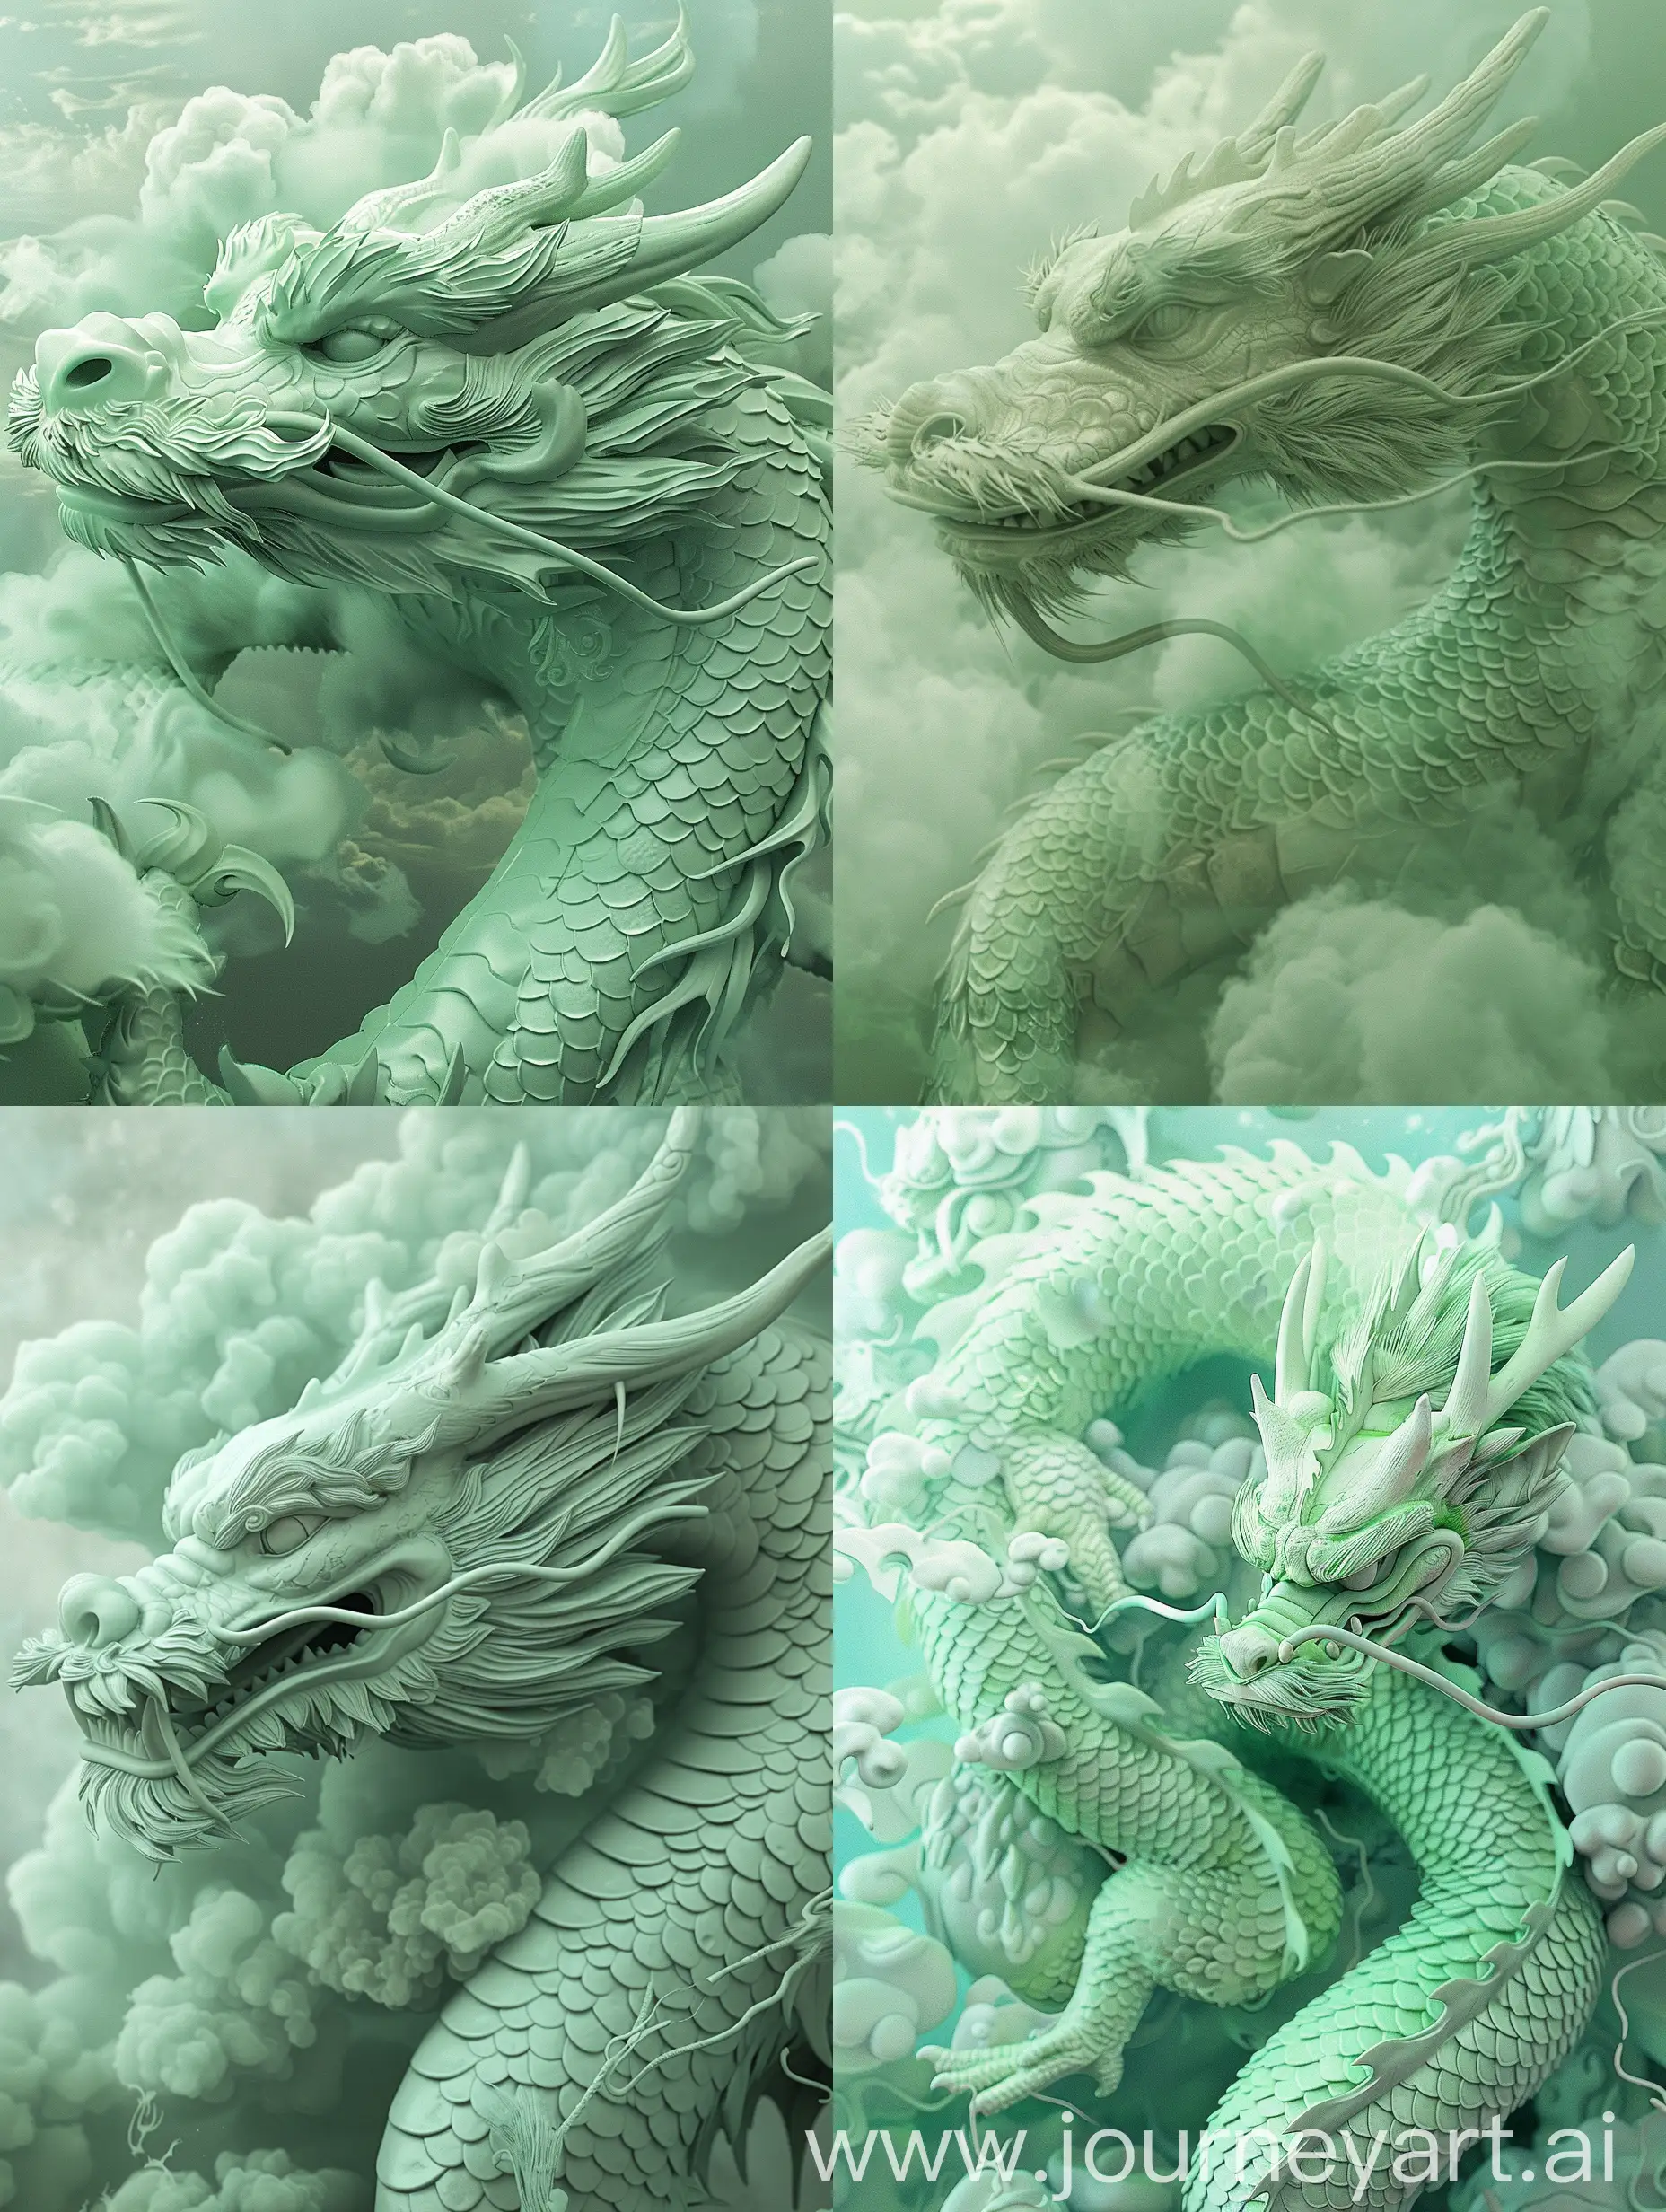 asian dragon in light green with clouds surrounding it, in the style of illusory hyperrealism, inventive character designs, peter gric, close up, todd mcfarlane, monochromatic palettes, 3d